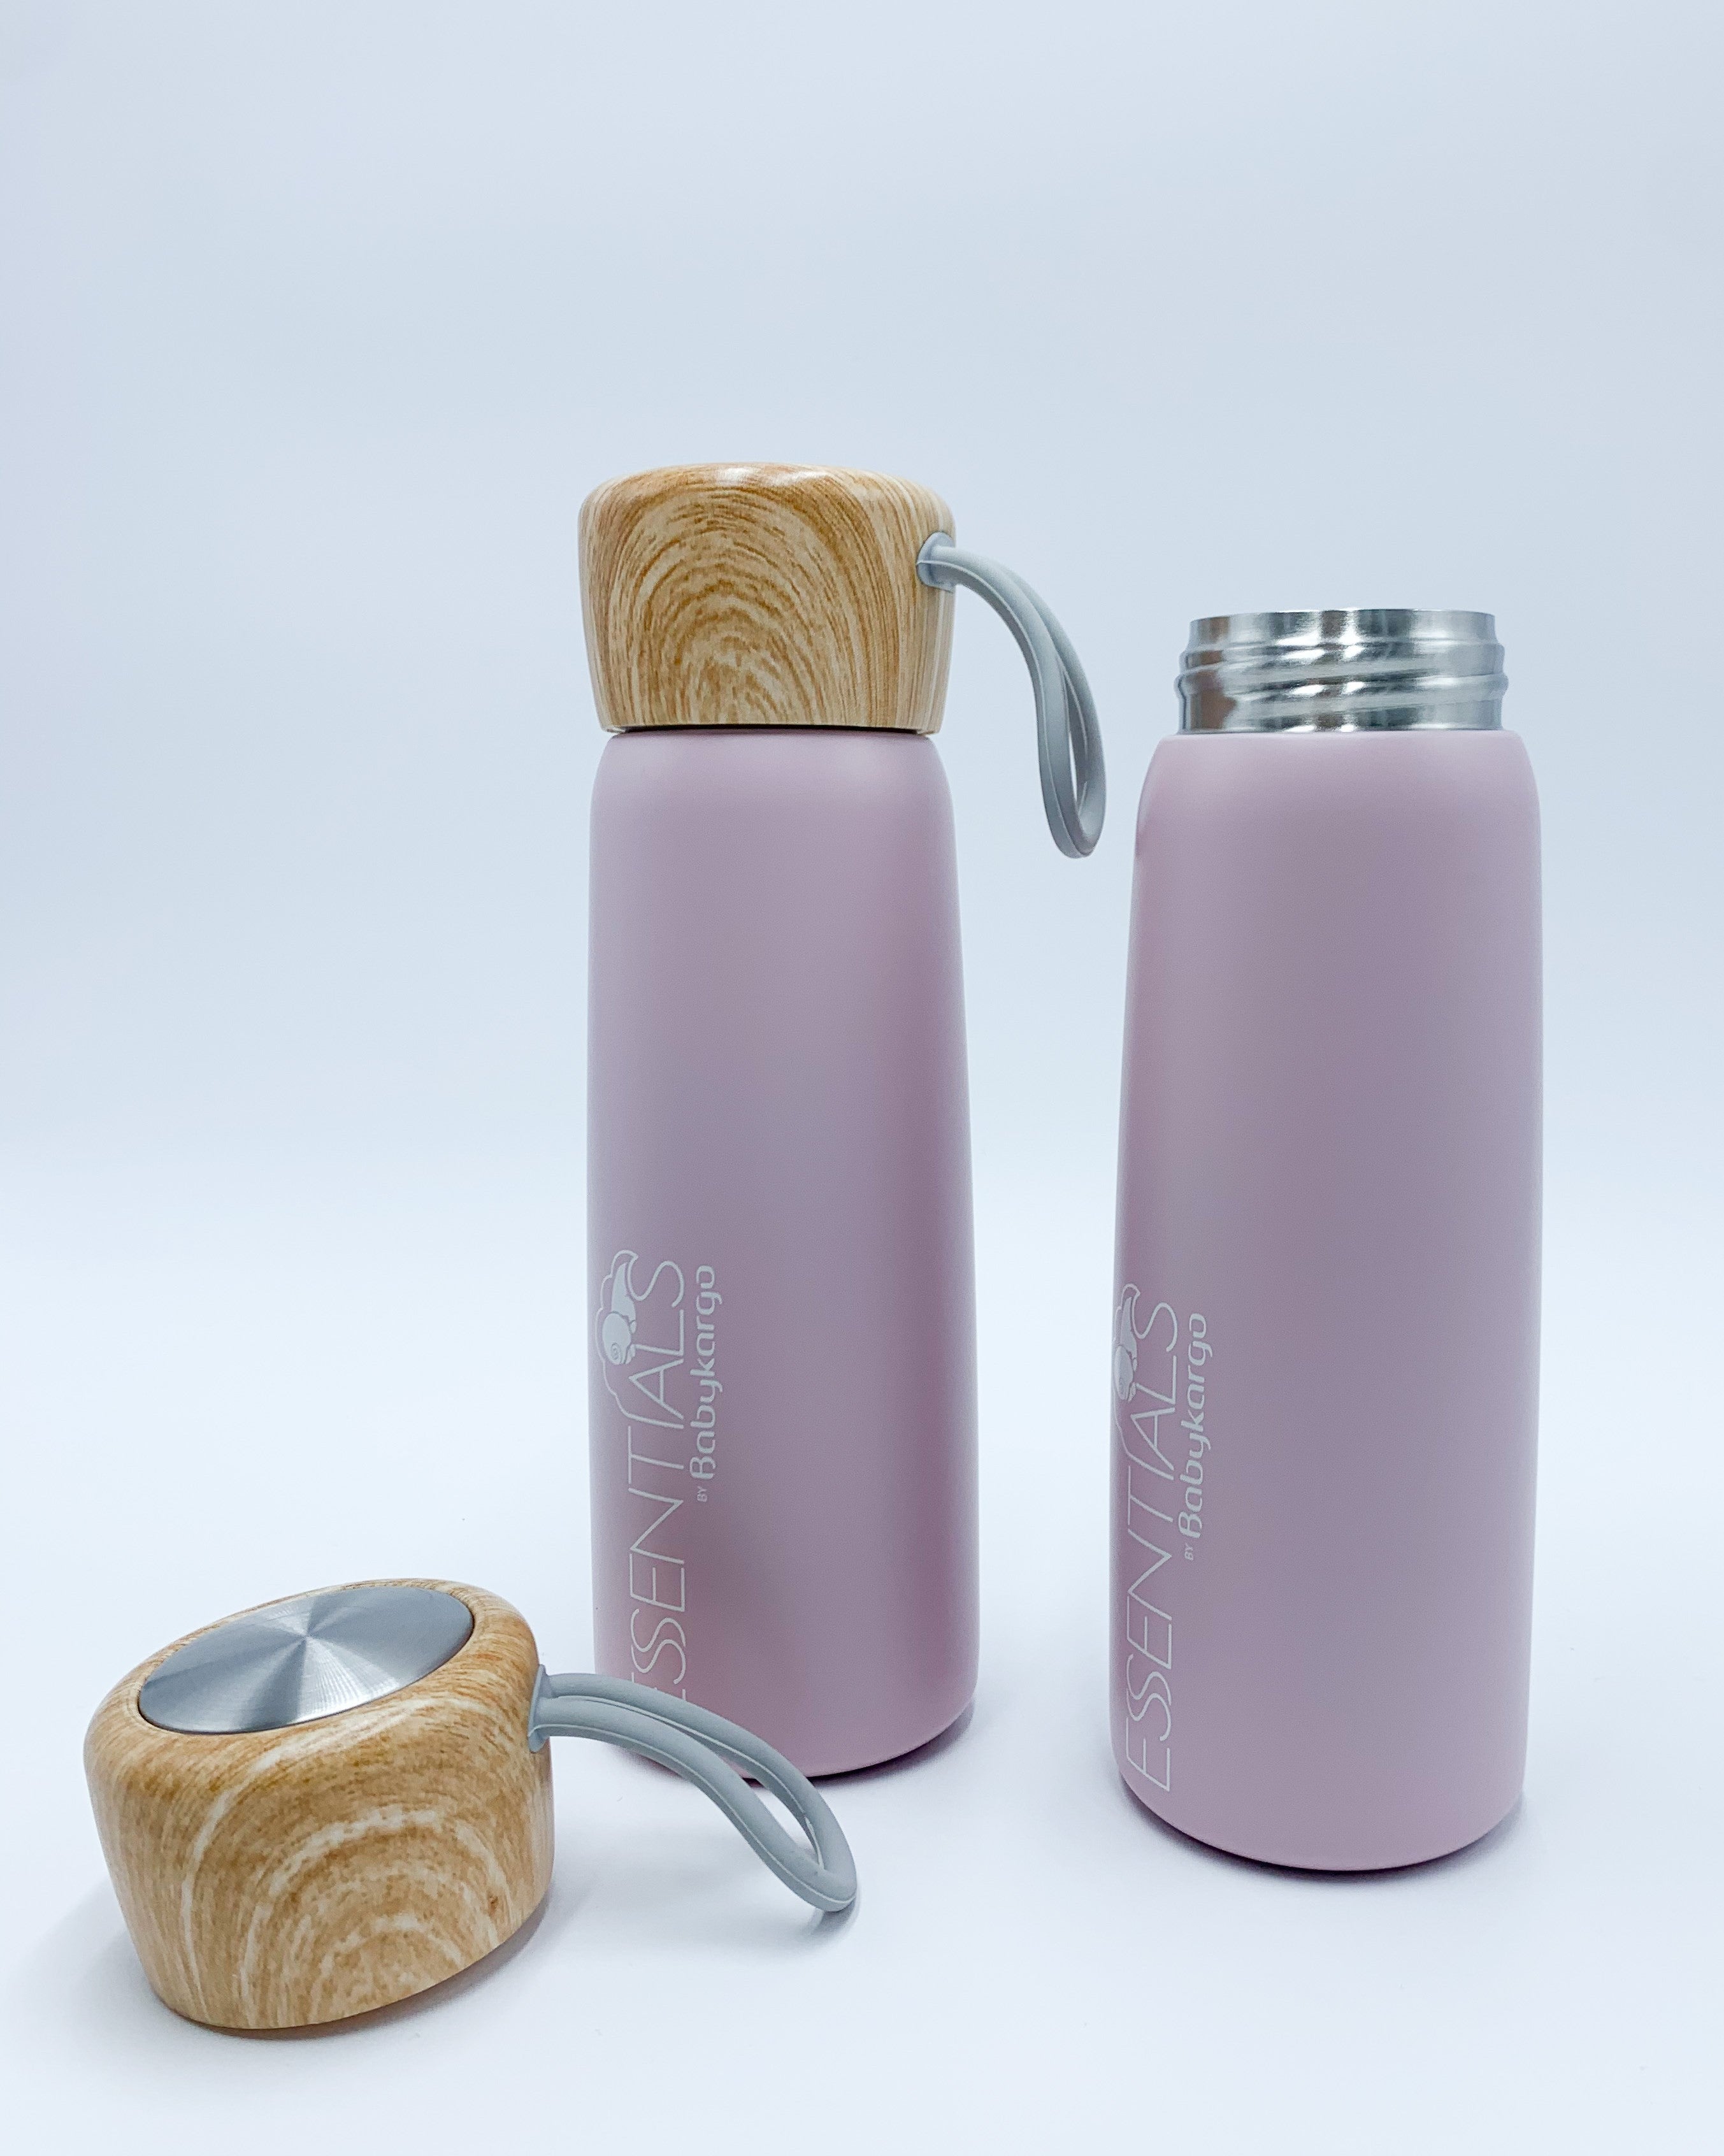 500ml. Insulated water bottle